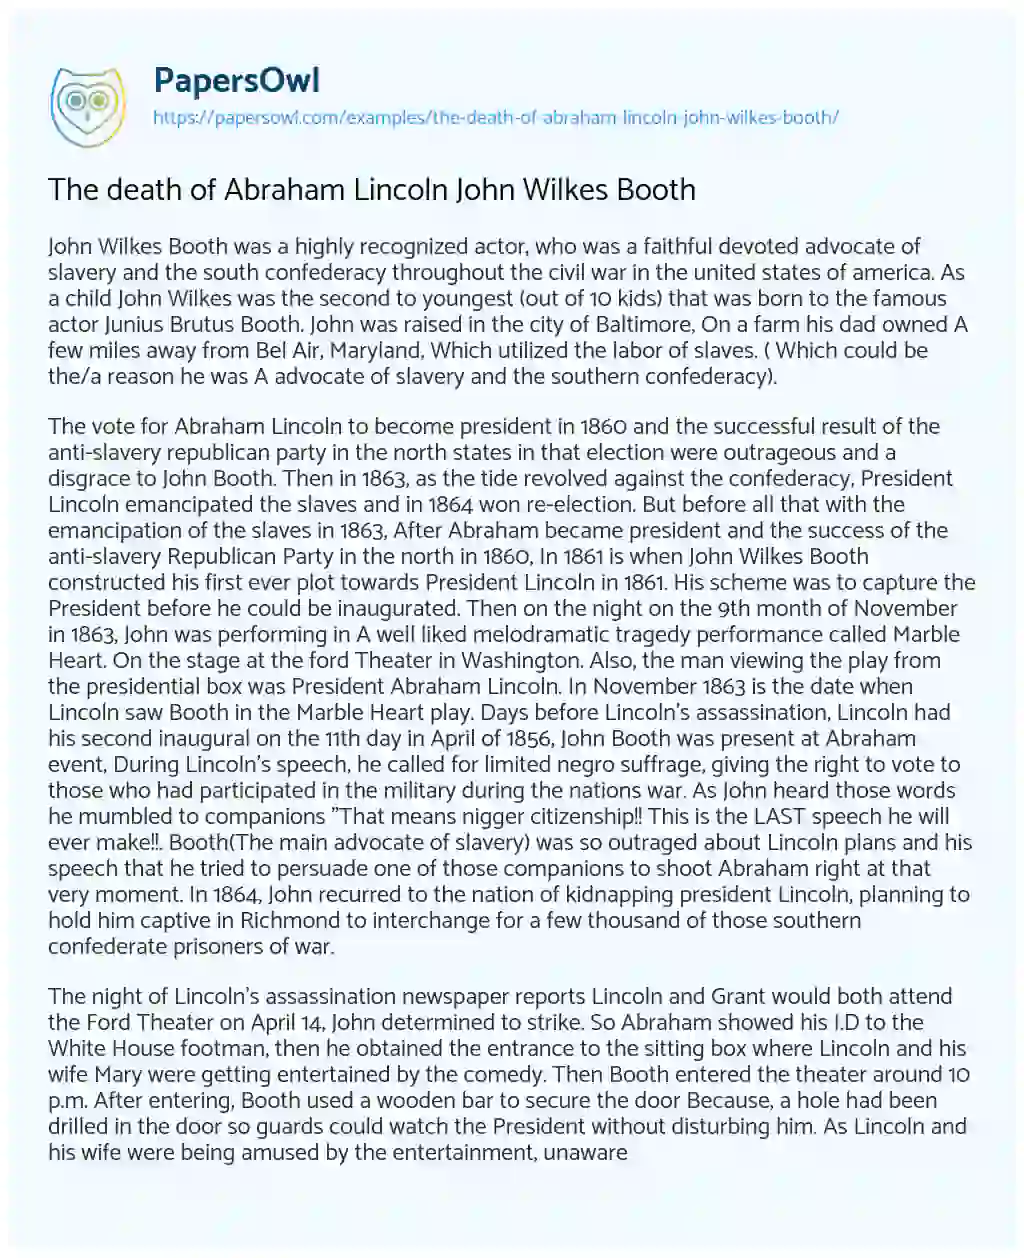 Essay on The Death of Abraham Lincoln John Wilkes Booth